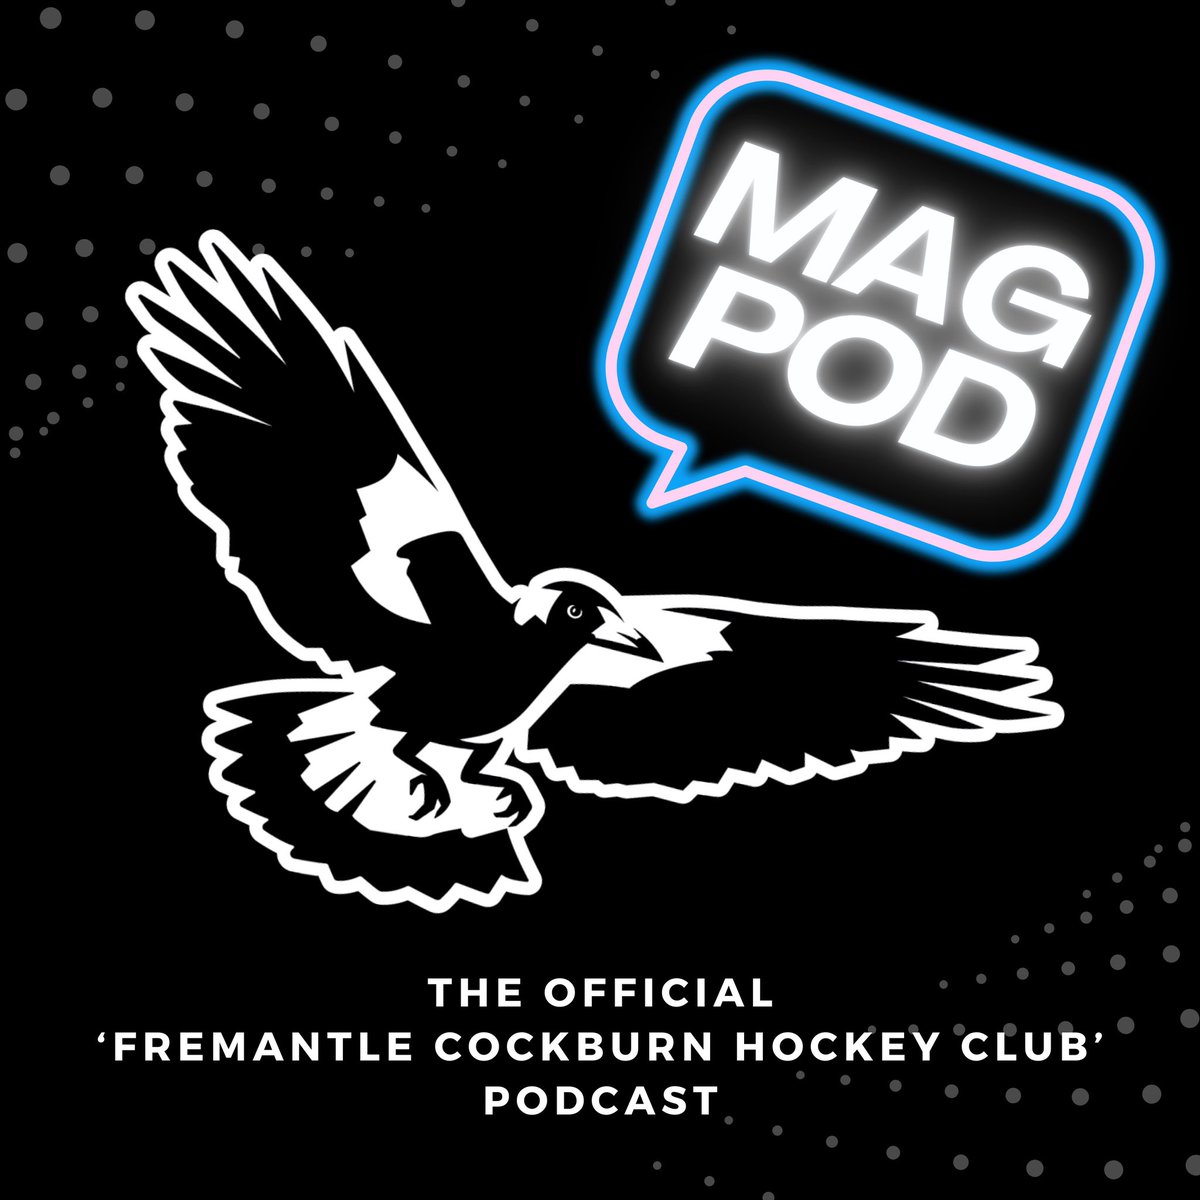 Introducing ✨🎙 MAGPOD 🎙✨, the hottest new hockey podcast in town 🔥 Fly over to the club YouTube channel to listen to the first episode 😉 Listen here: ➡ youtube.com/watch?v=D2RE5_… ⬅ #magpies #hockey #podcast #magpod #fieldhockeypodcasts